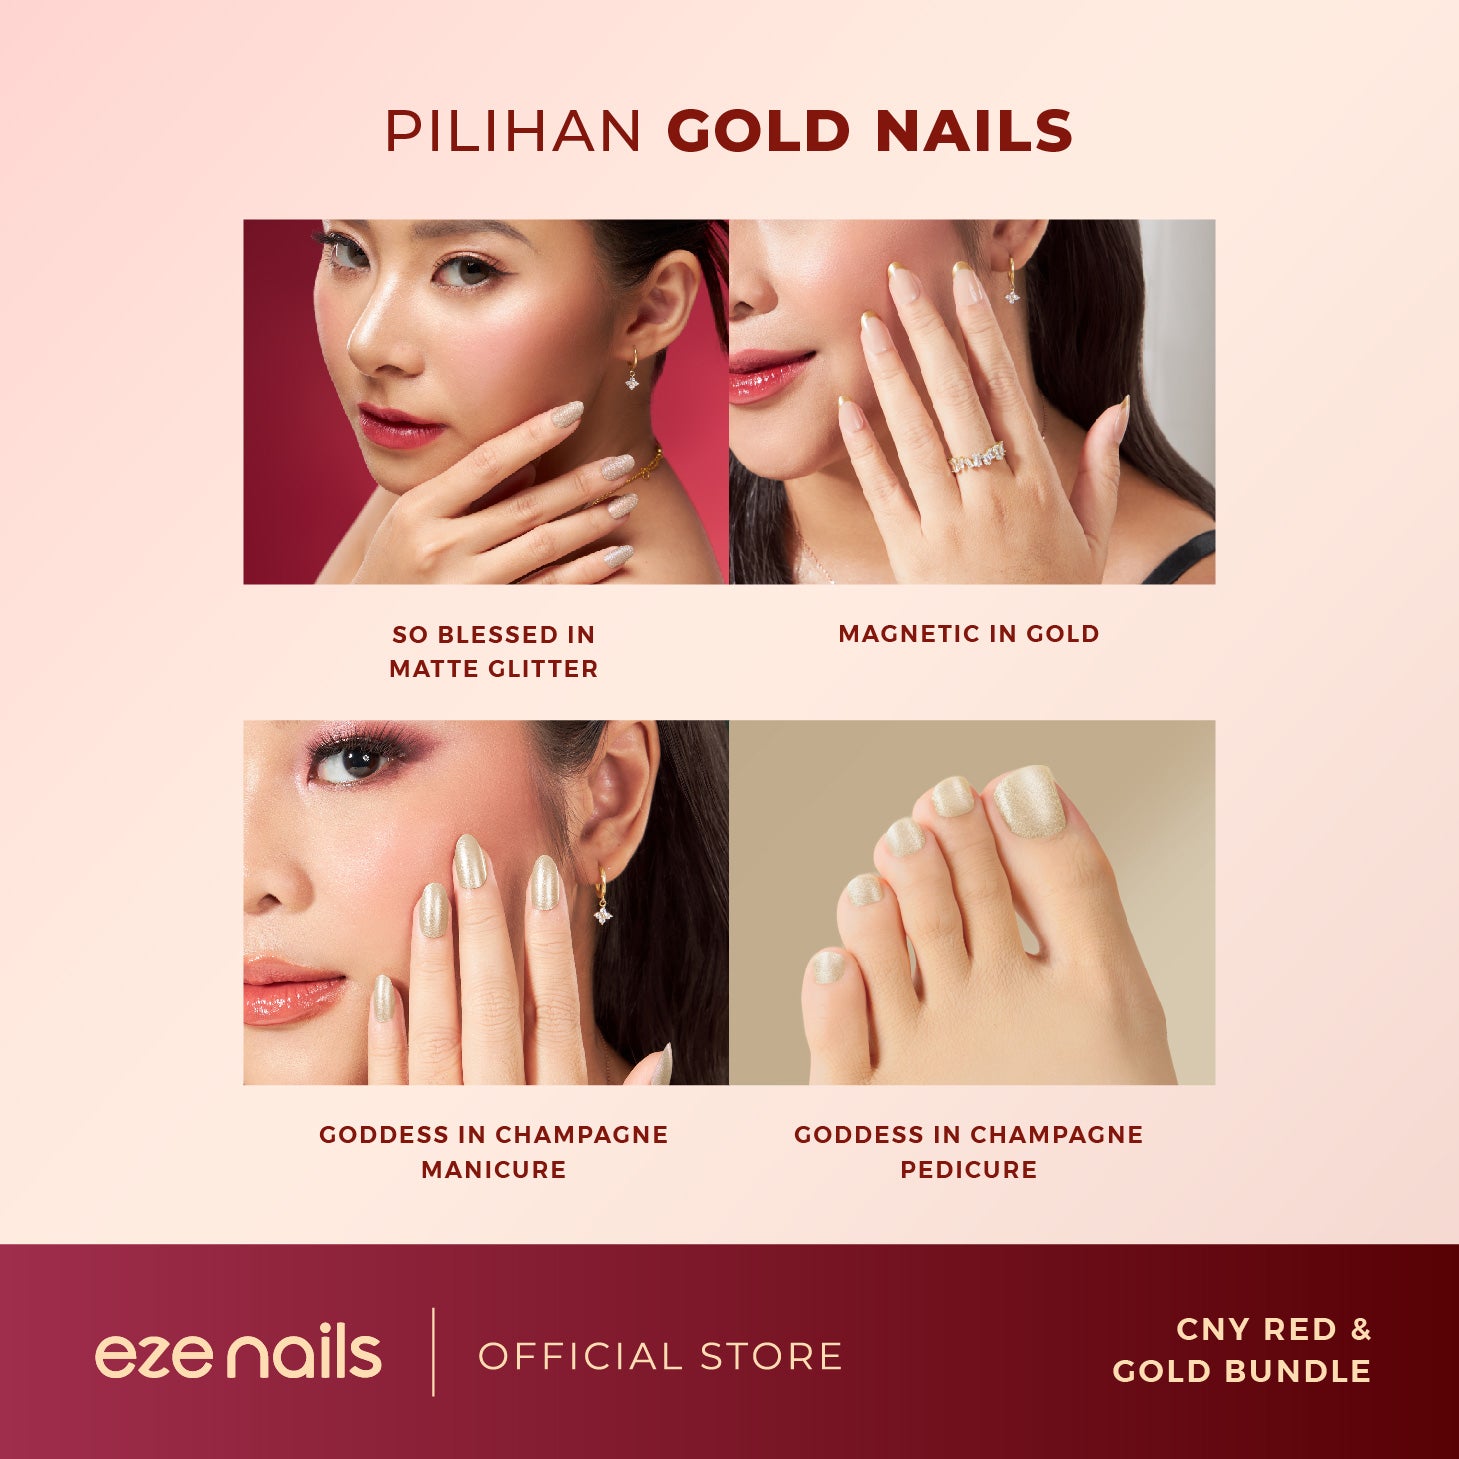 CNY SPECIAL RED & GOLD NAILS BUNDLE: BUY 2 GET 3 (2 Red/Gold Spot On Nails + FREE  1 Glam Nails)